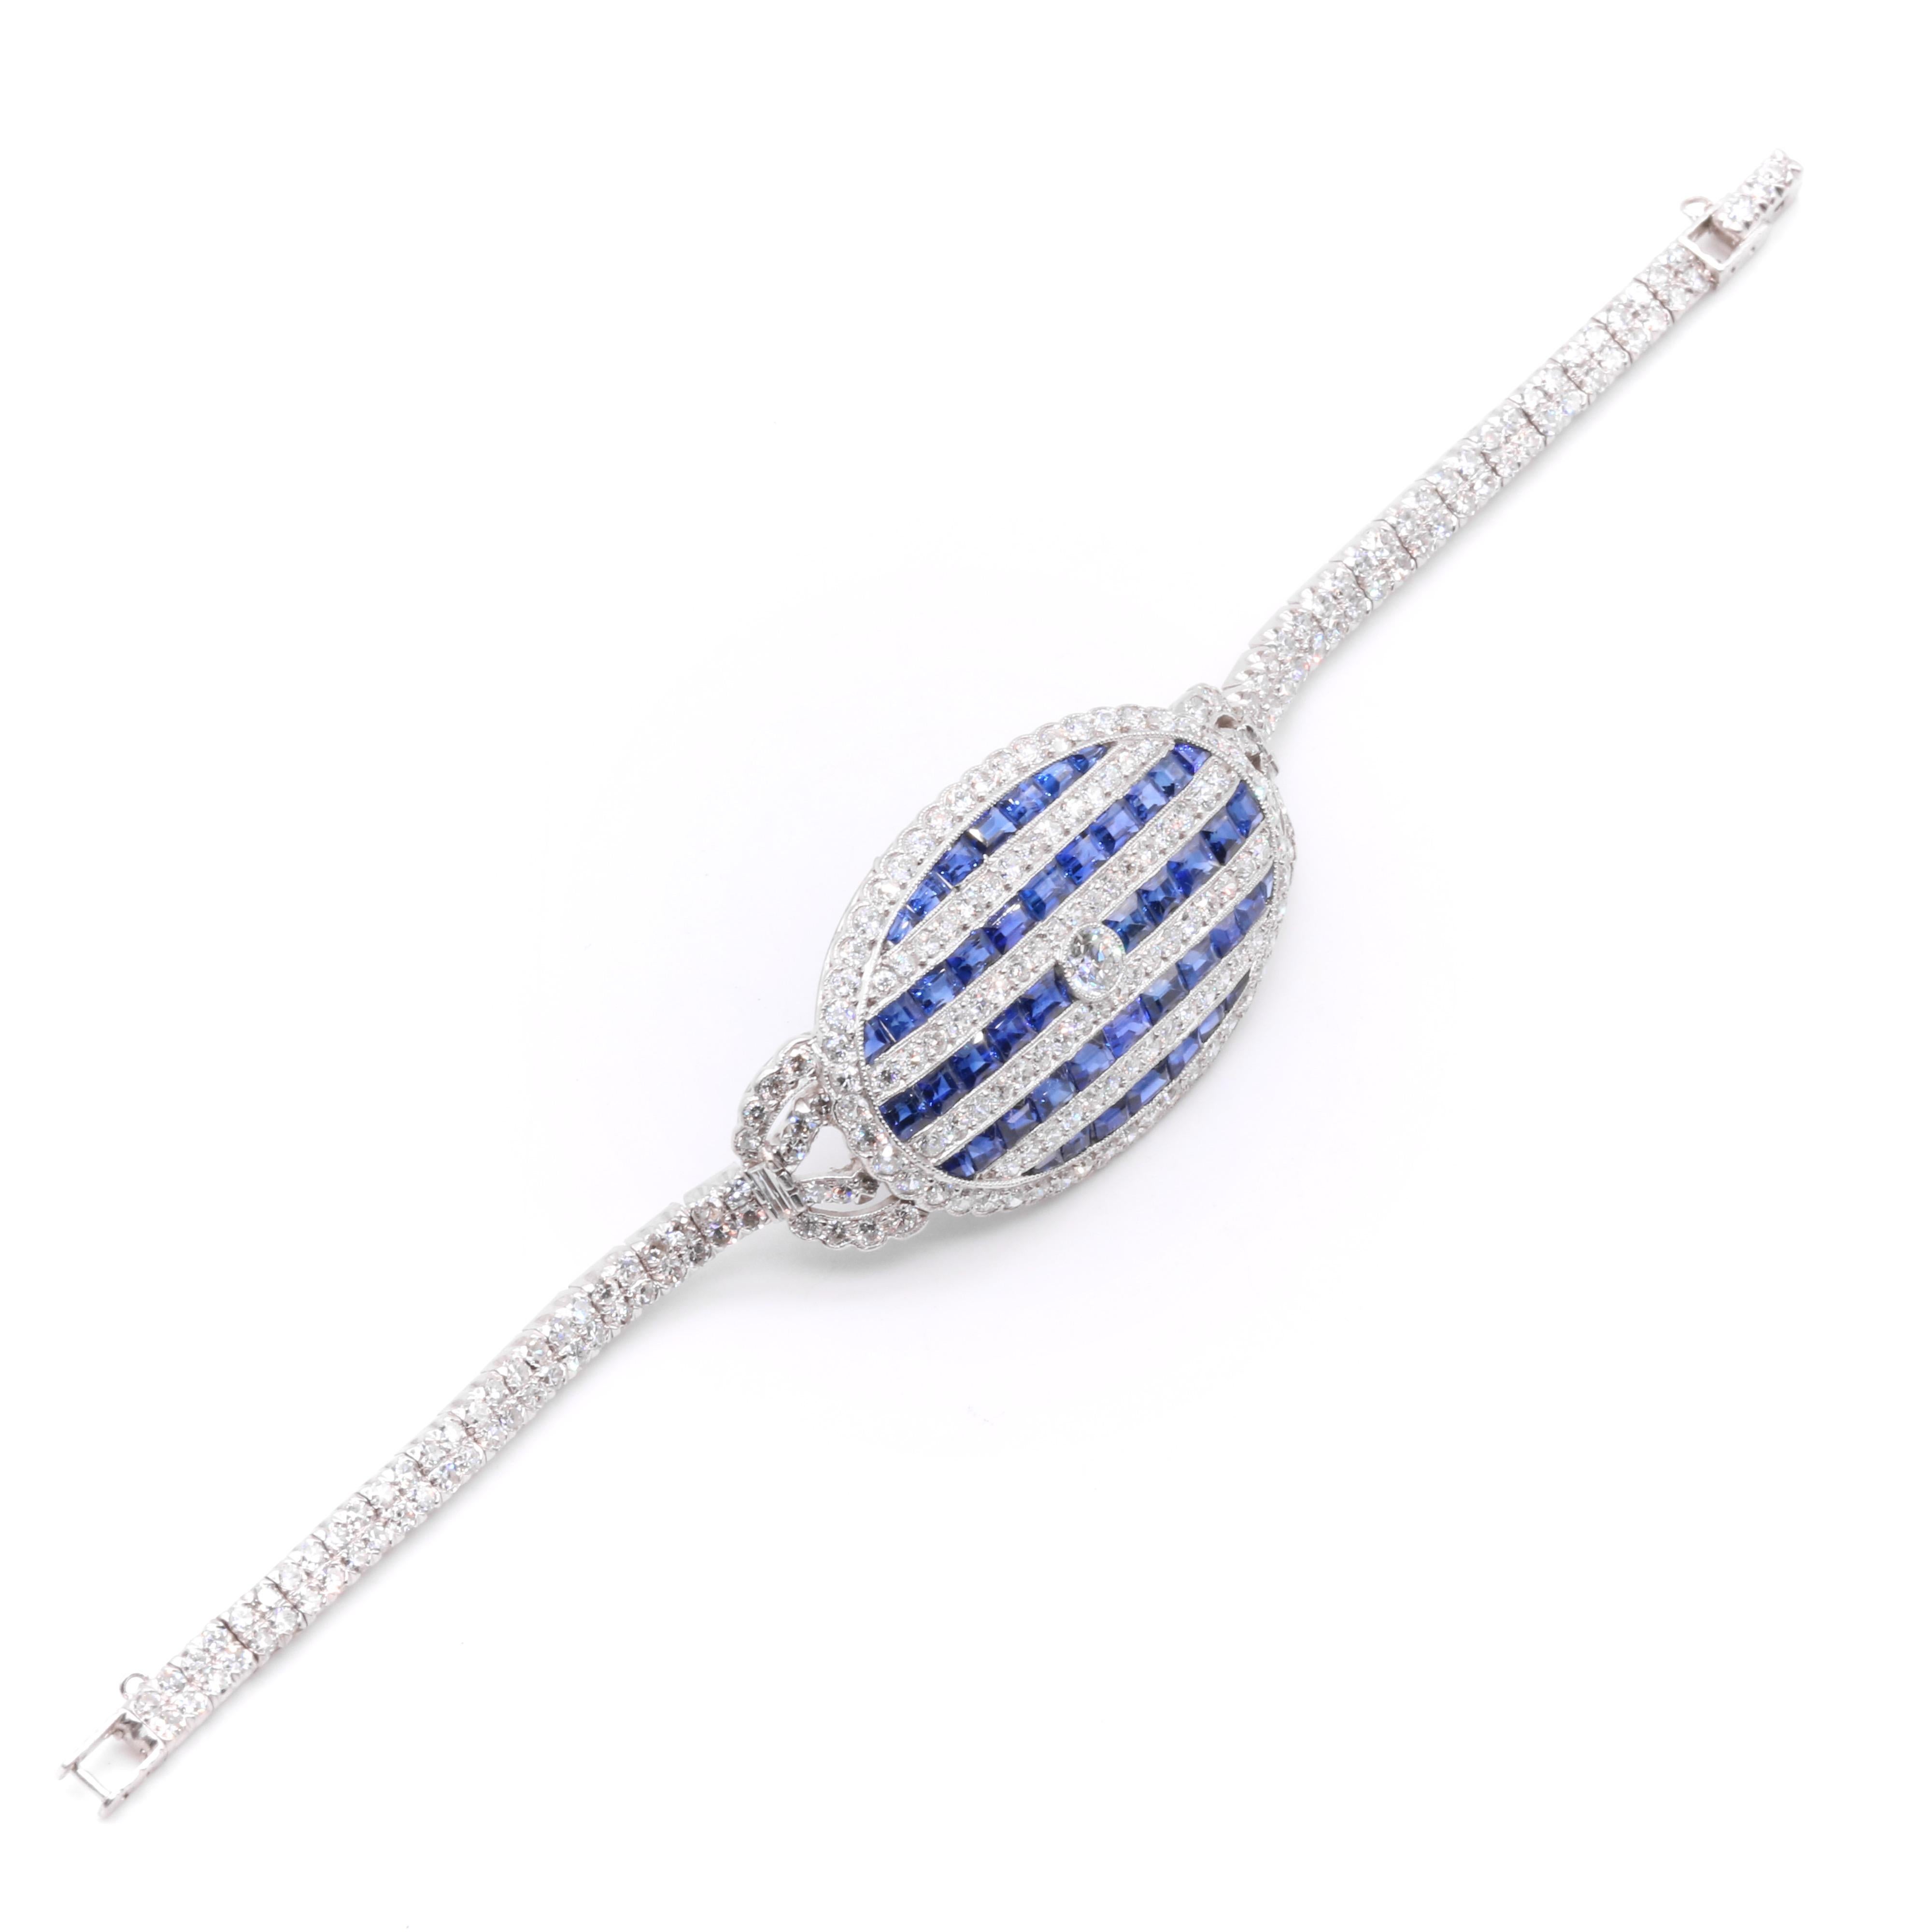 Art Deco 1920s Platinum & 14K Gold 6.5tgw Diamond & Sapphire Panel Bracelet In Good Condition For Sale In Staines-Upon-Thames, GB